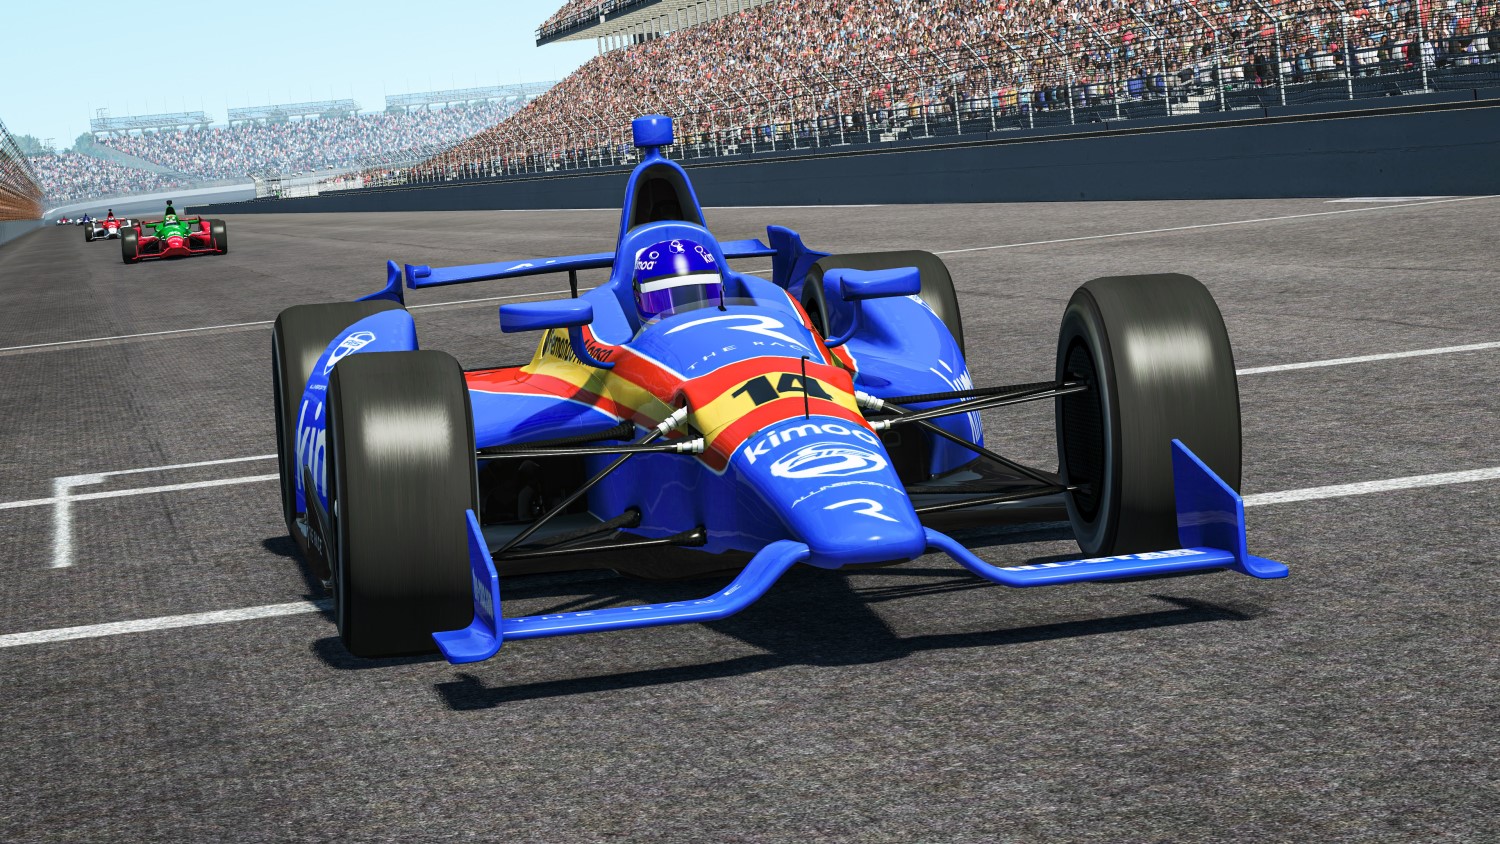 Will Fernando Alonso gets his first Indy 500 win?